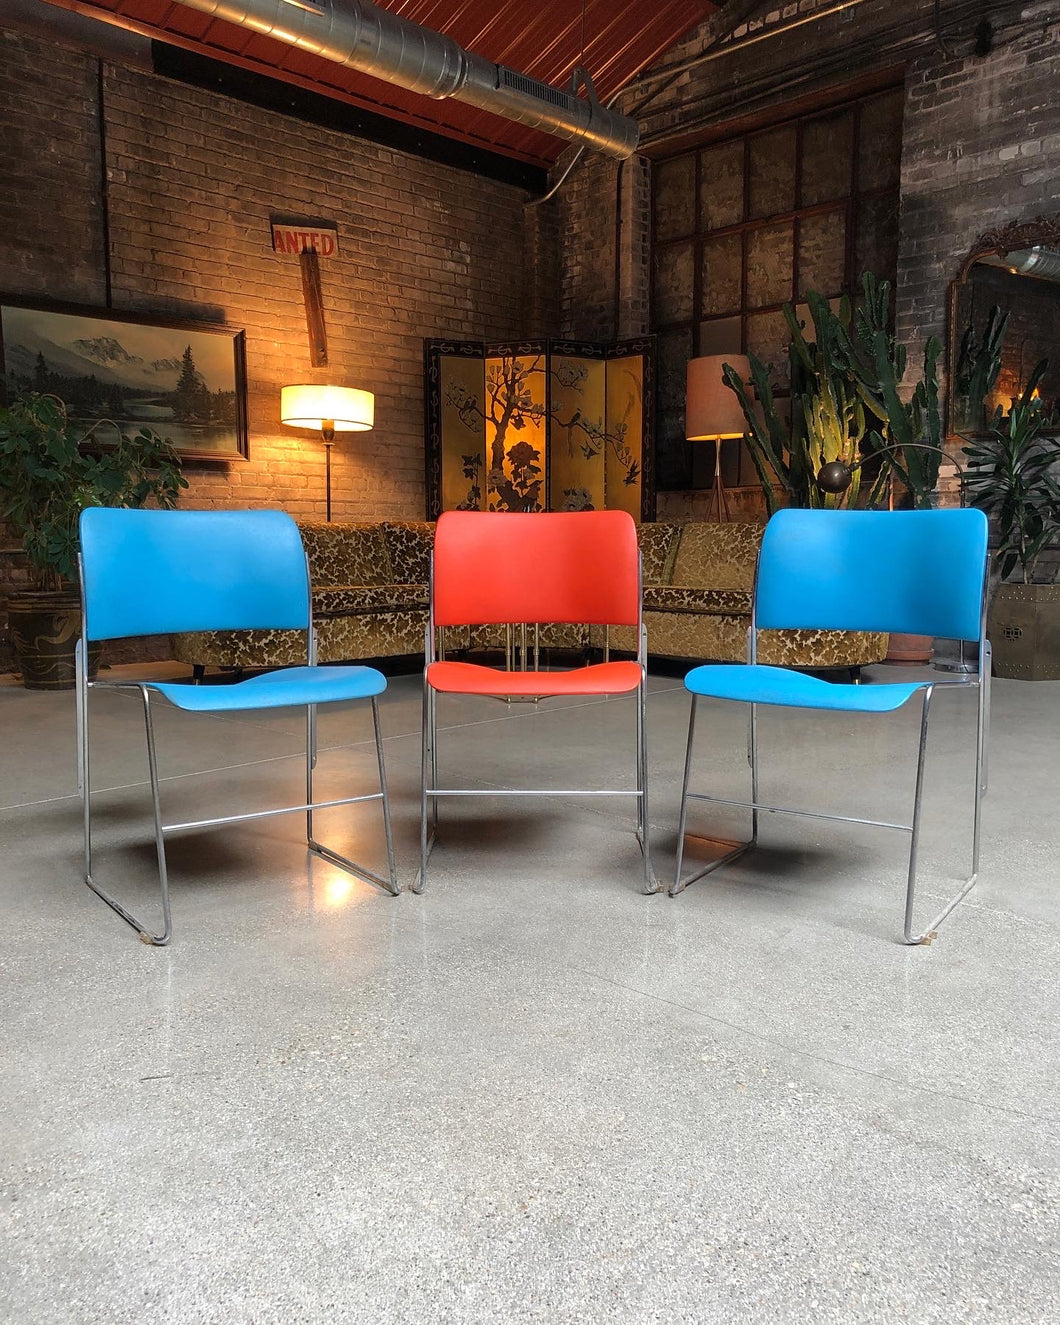 Metal Office Chairs by David Rowland Set (3)